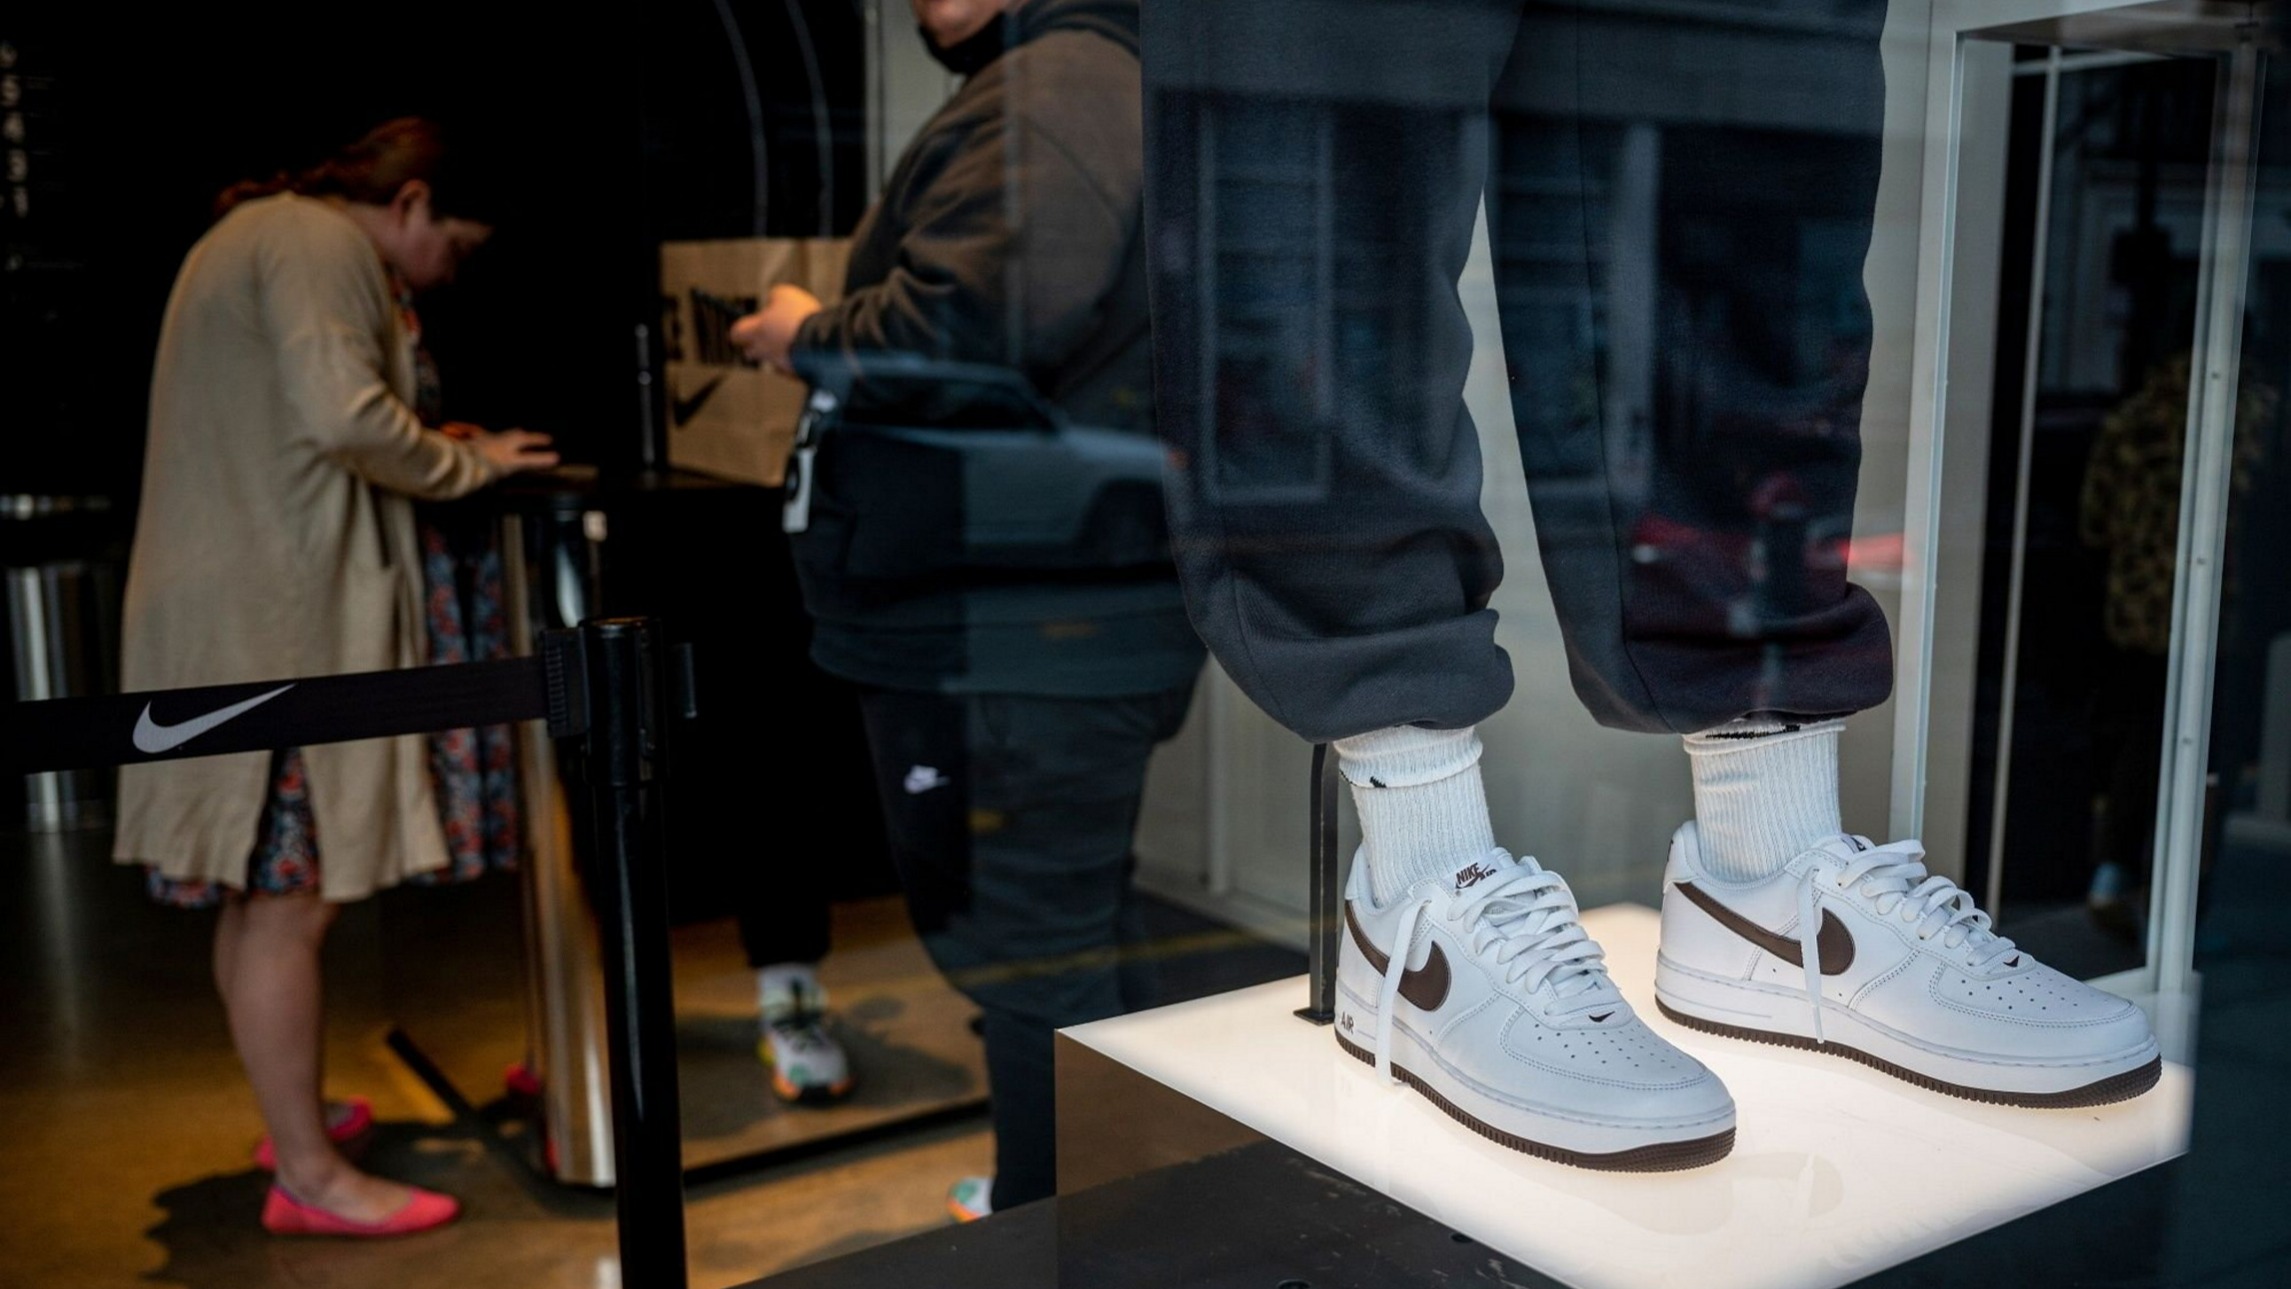 Nike boosts global sportswear sector with upbeat forecast | Financial